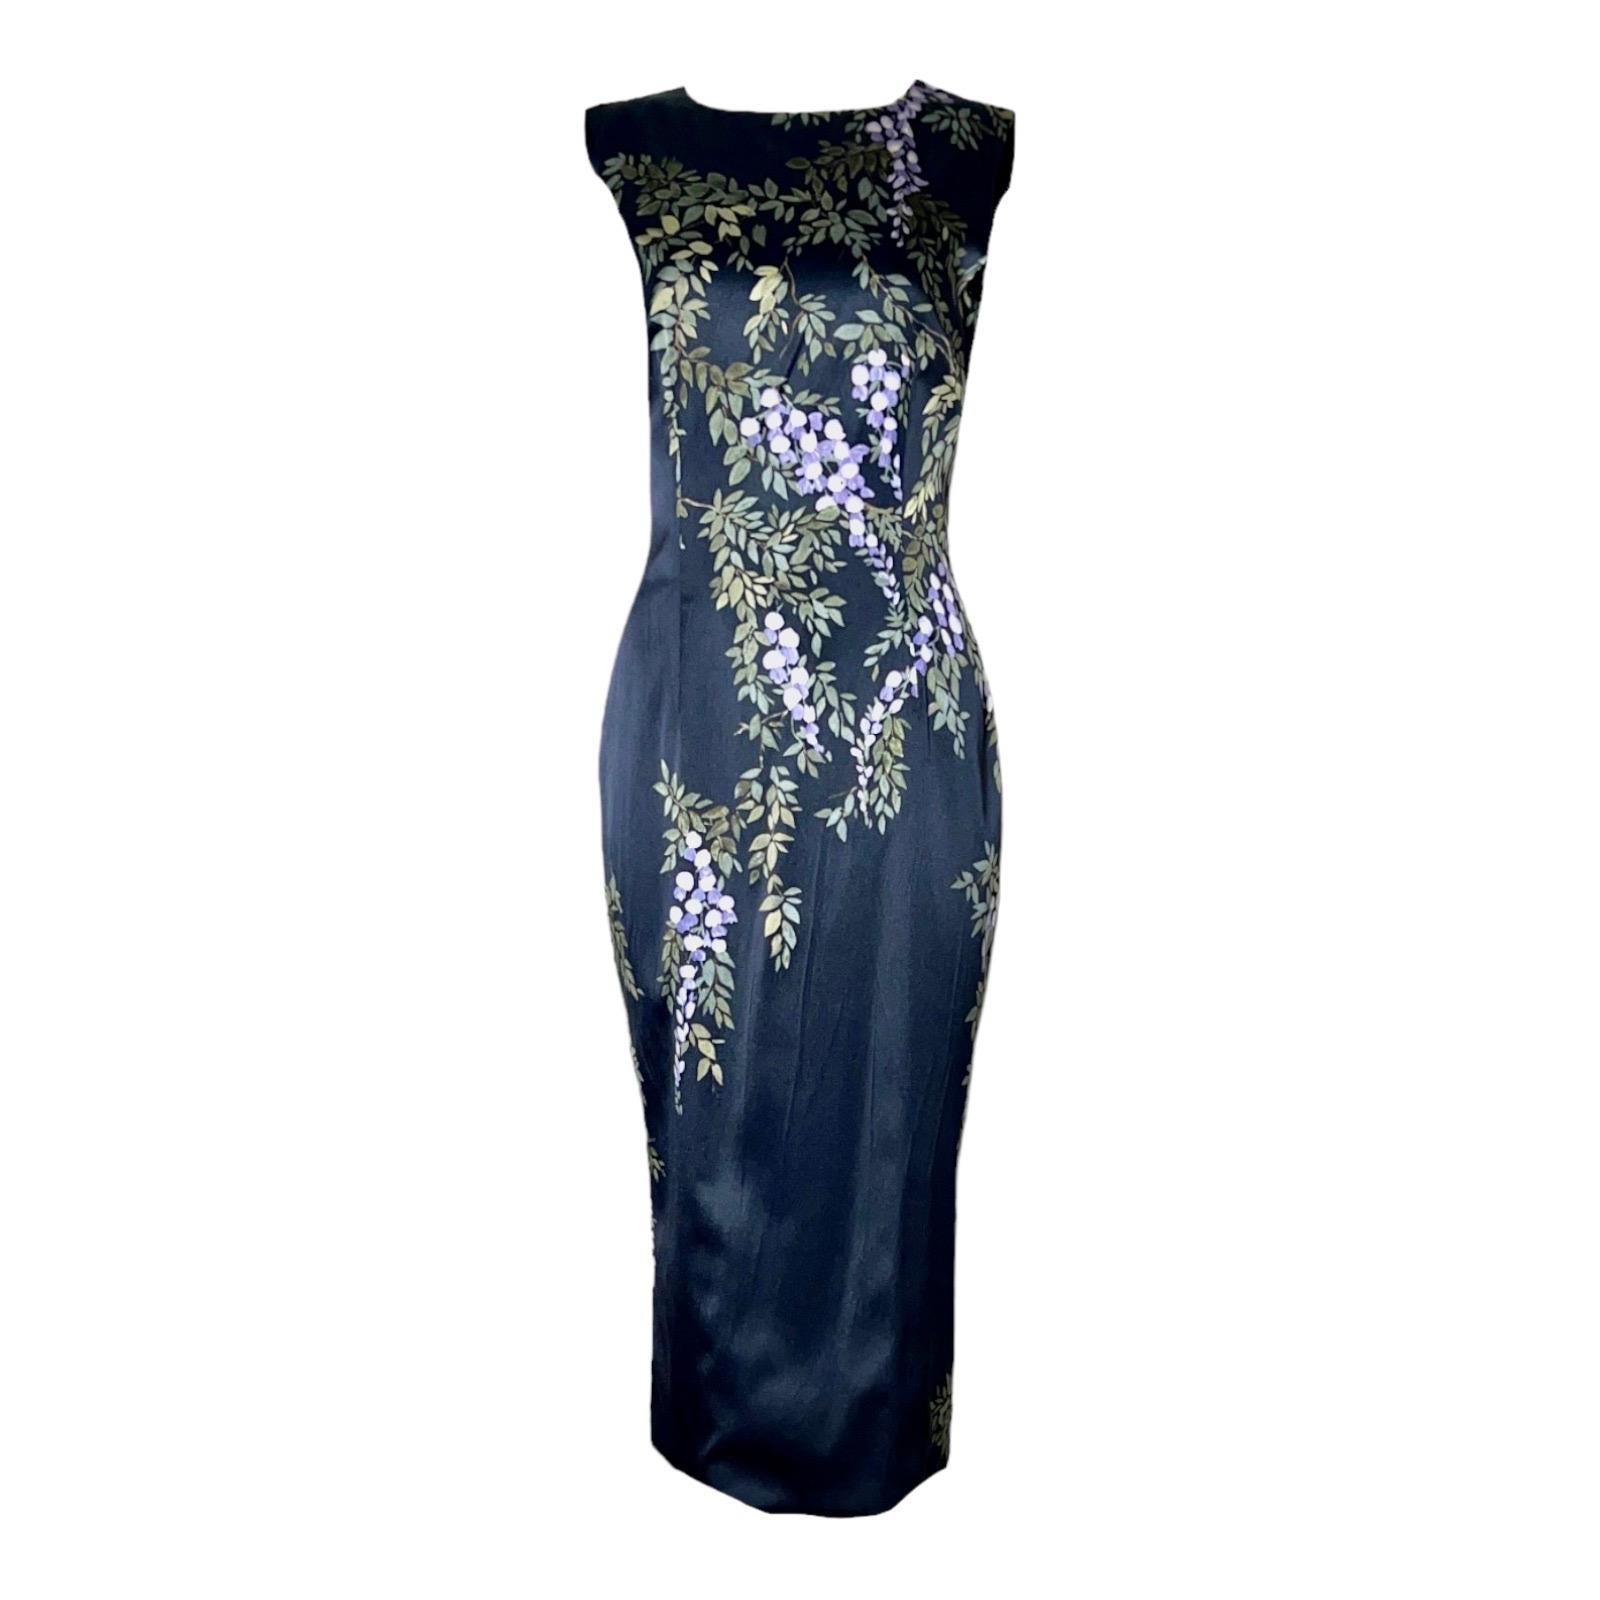 DOLCE & GABBANA 1998 Hand-Painted Print Floral Evening Dress Gown 40 For Sale